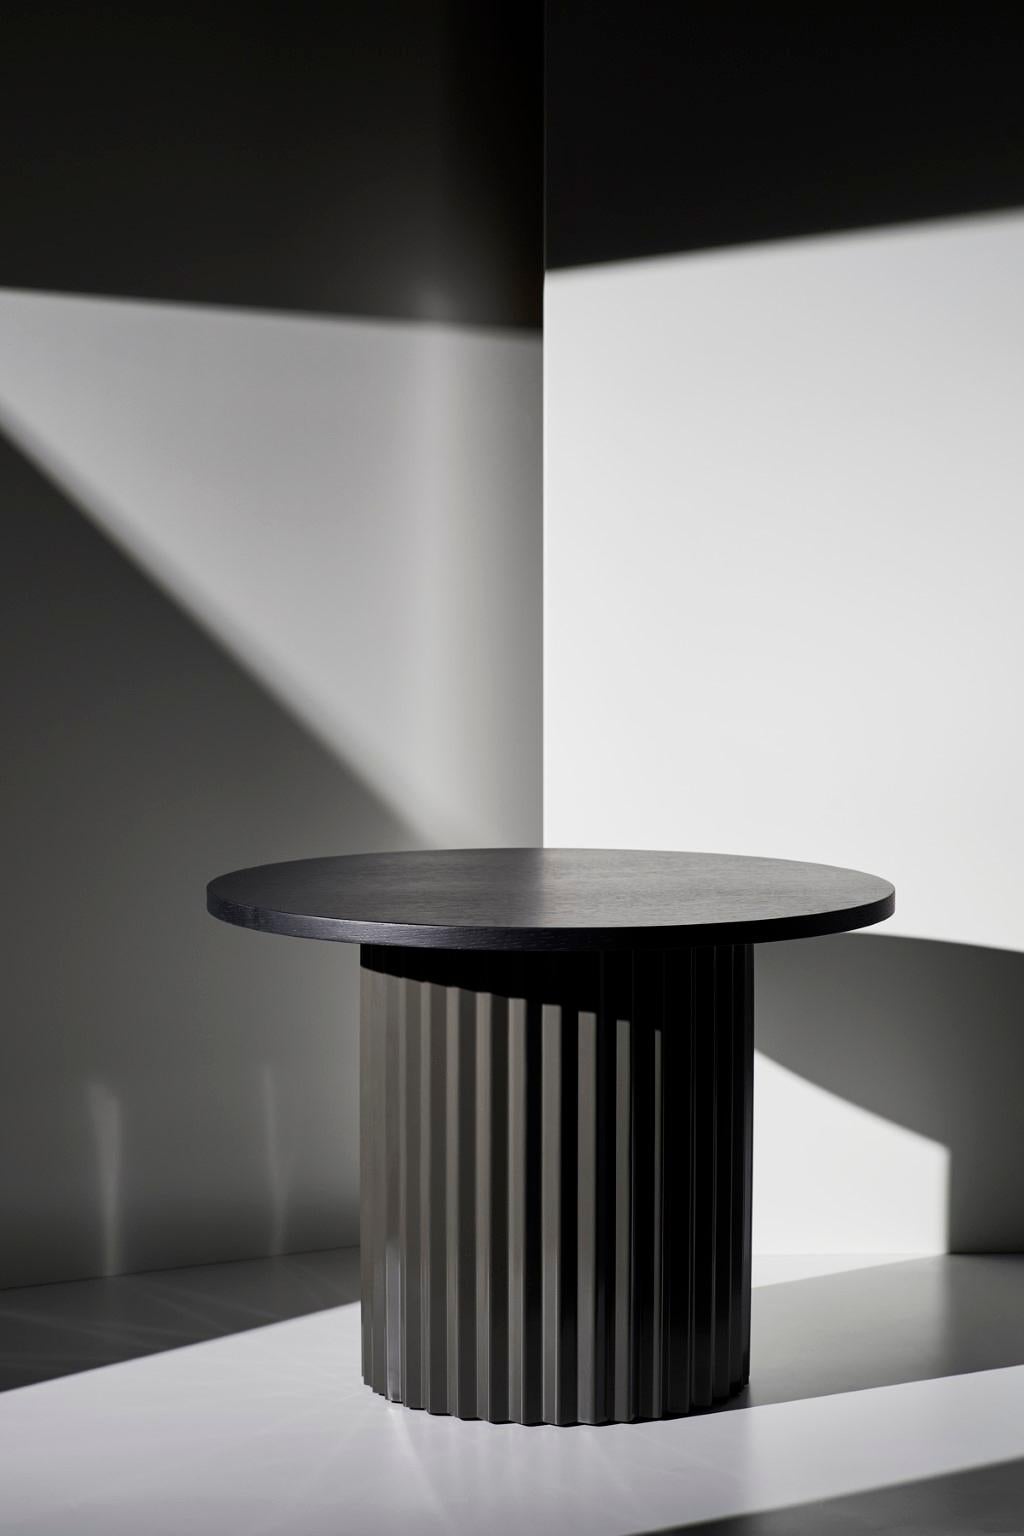 Oak table 60 by Lisette Rützou
Dimensions: D 60 x H 41 cm
Materials: Oak tabletop 
Also available Ø 40.

 Lisette Rützou’s design is motivated by an urge to articulate a story. Inspired by the beauty of materials, form and architecture, each